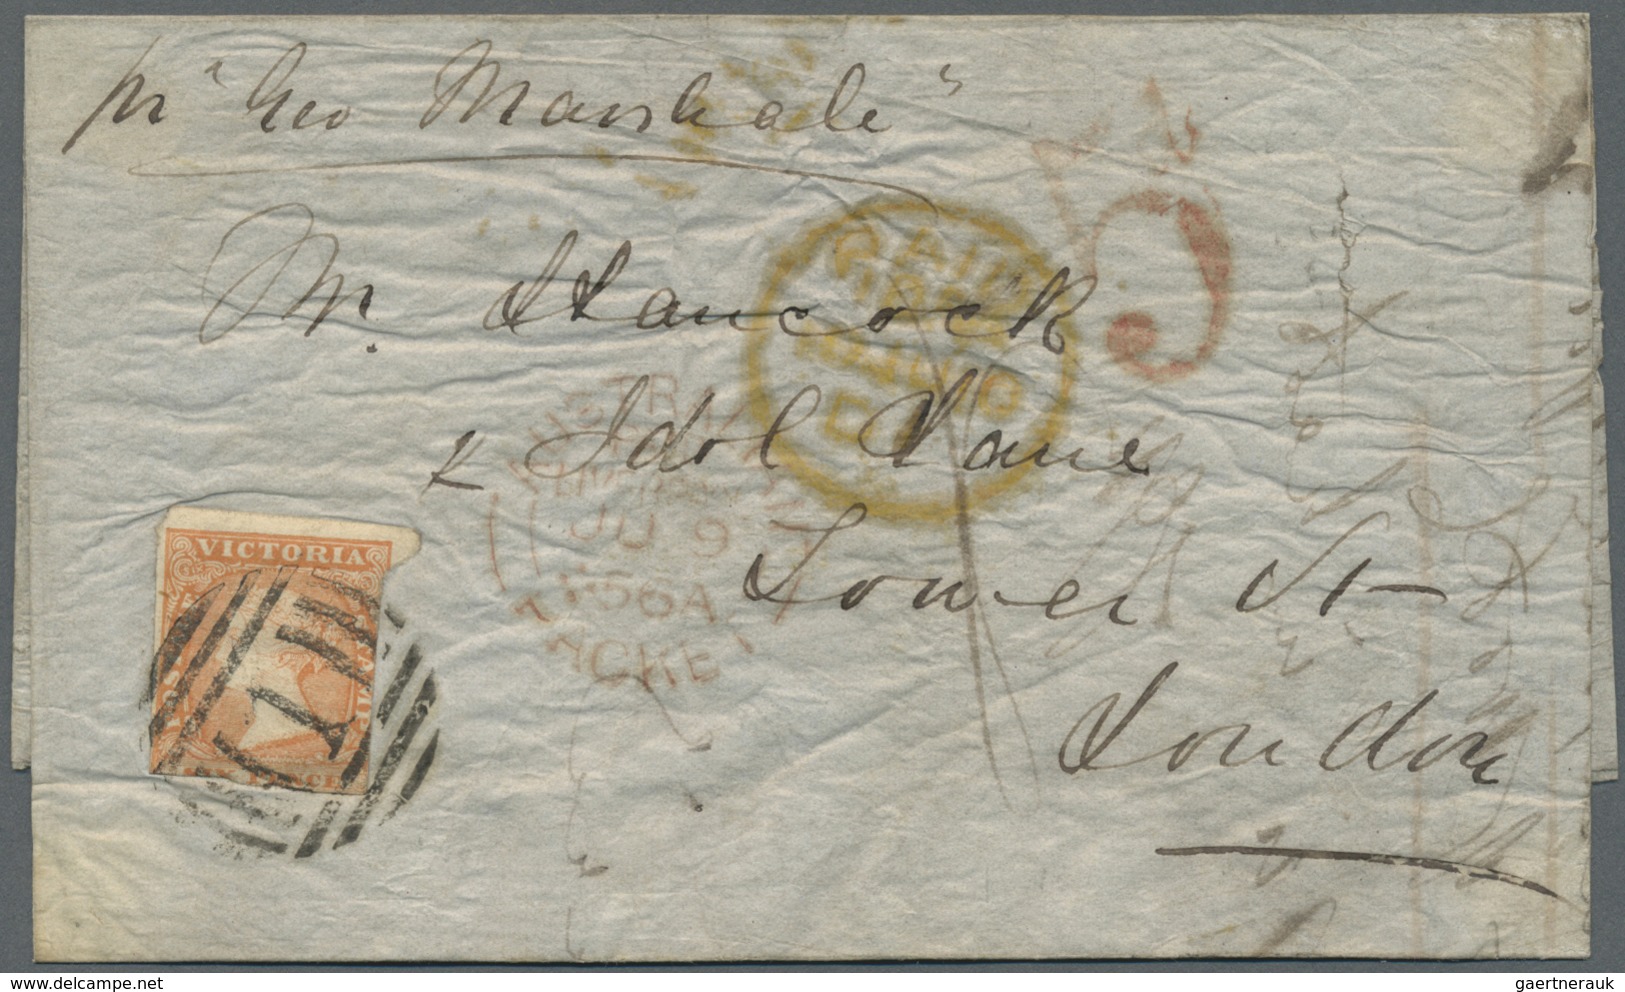 Br/Brfst Victoria: 1856/1857, three covers, one folded entire and one cover front each bearing woodblocks 6d